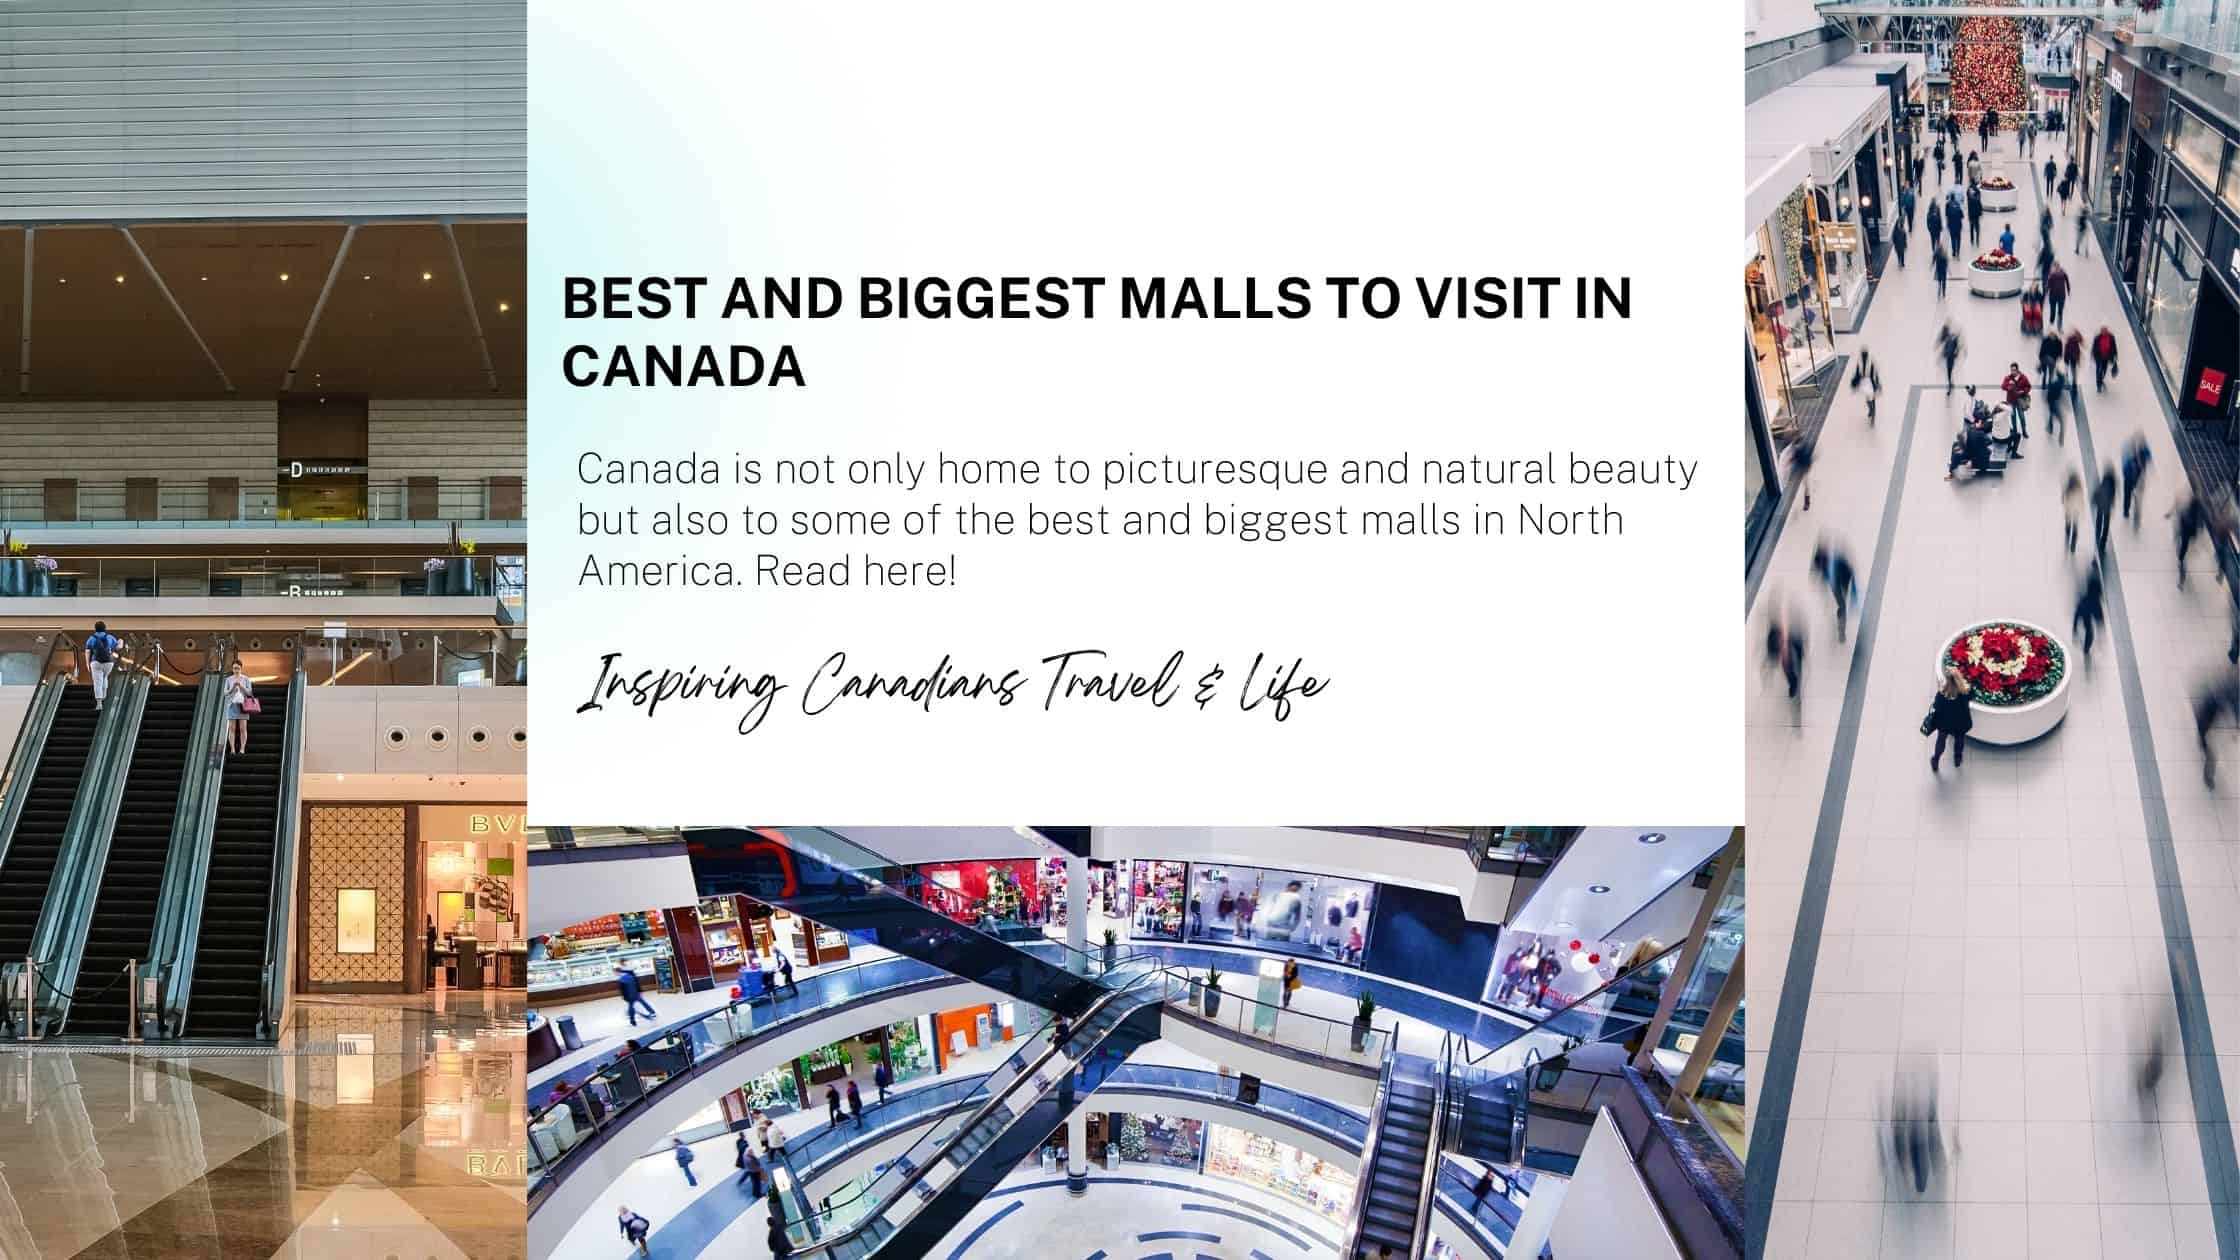 Best and biggest malls to visit in Canada